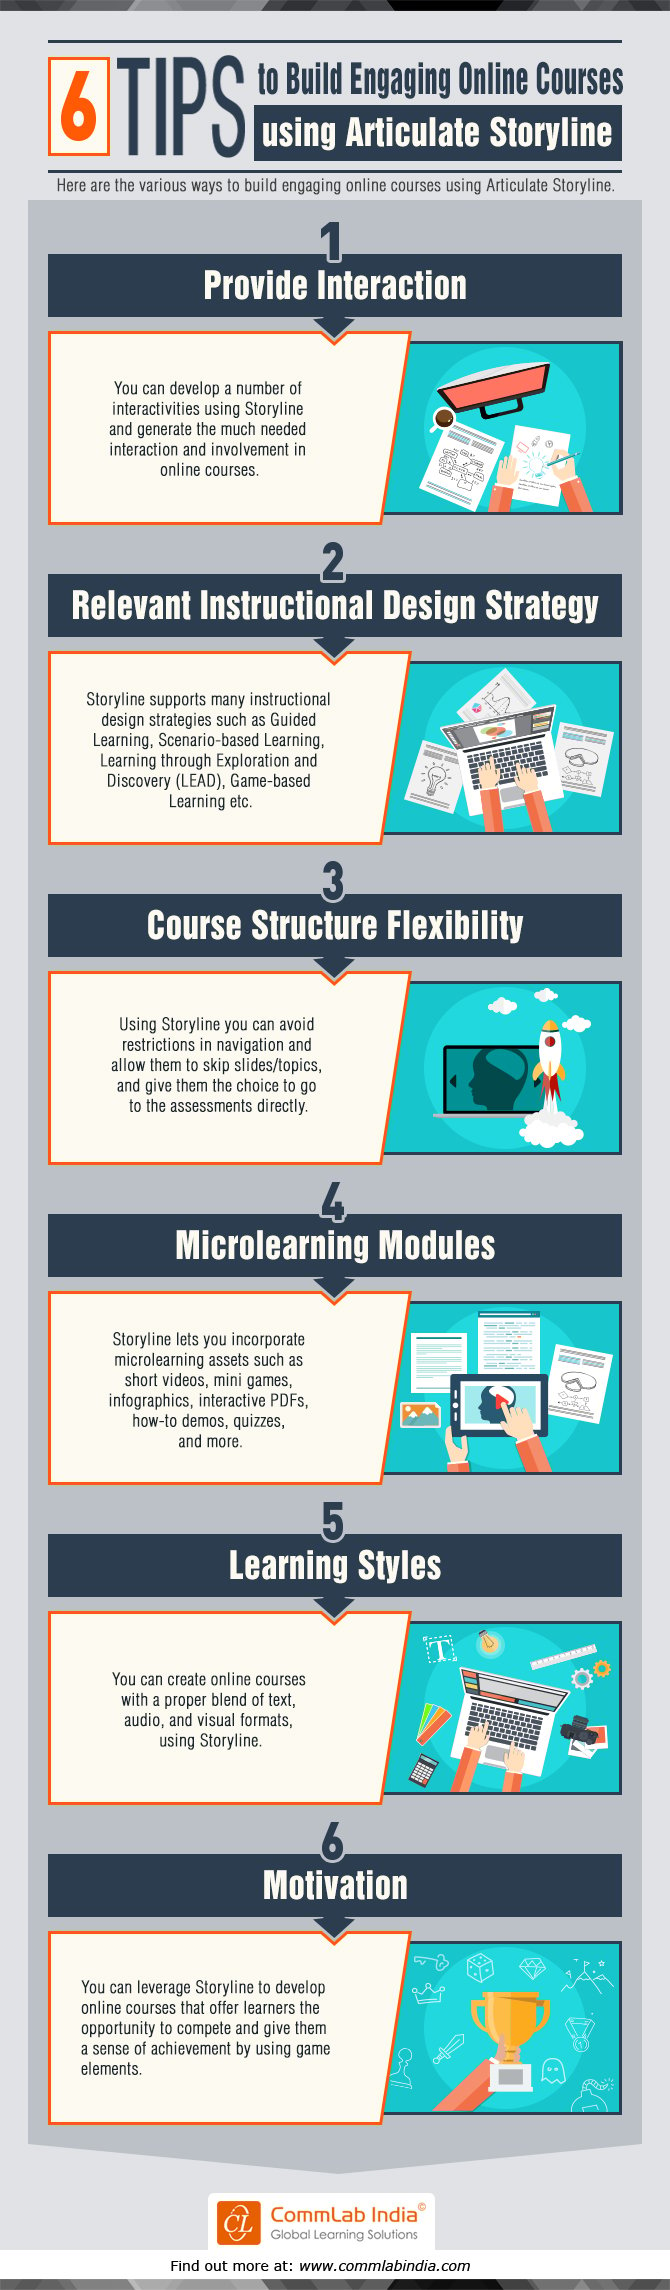 6 Tips to Build Engaging Online Courses using Articulate Storyline [Infographic]